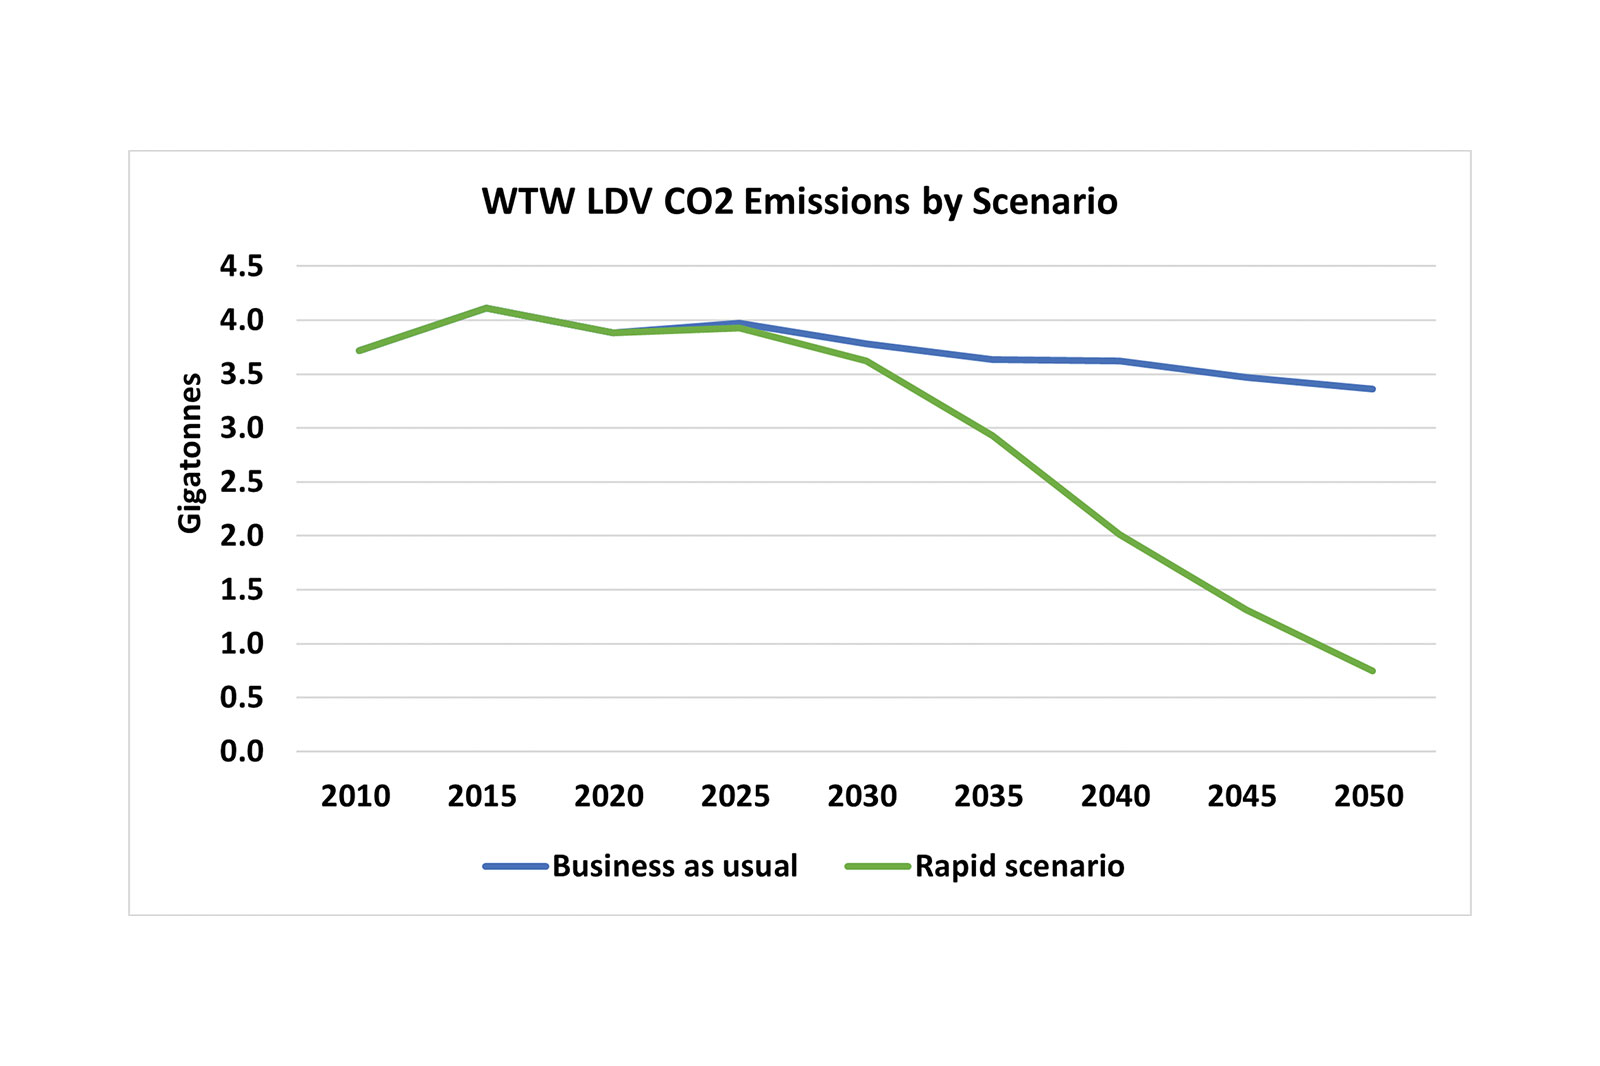 Achieving the ZERO pathway would result in a 77% CO2 reduction in 2050 relative to a business-as-usual case.